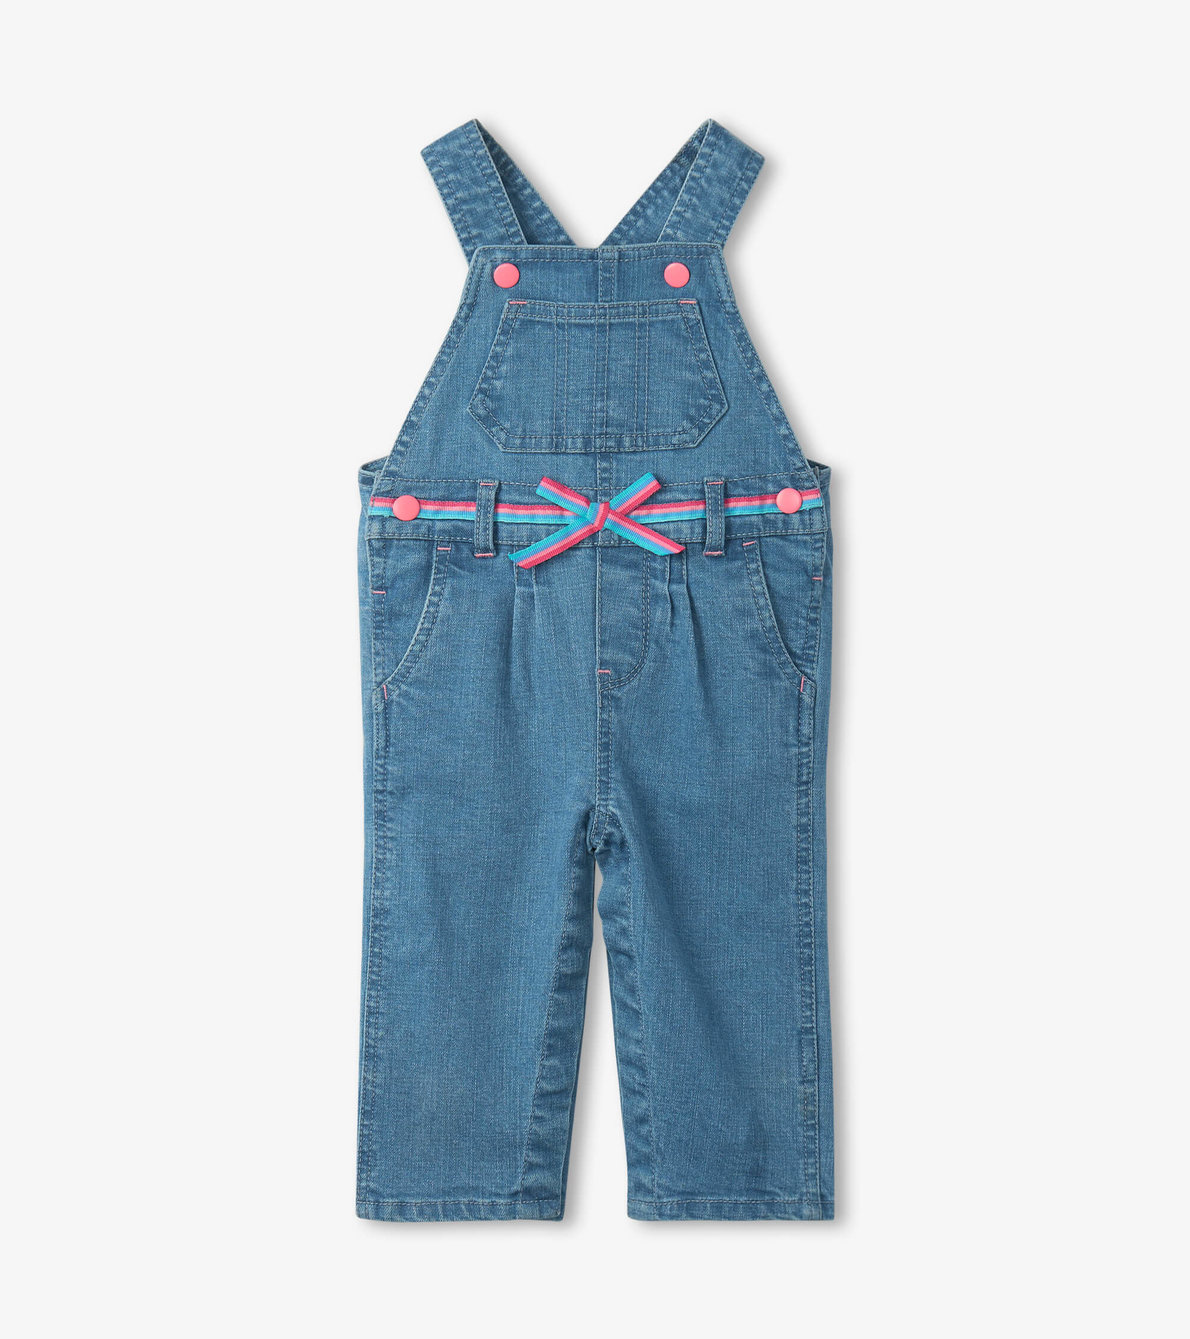 View larger image of Baby Spring Blue Denim Overalls